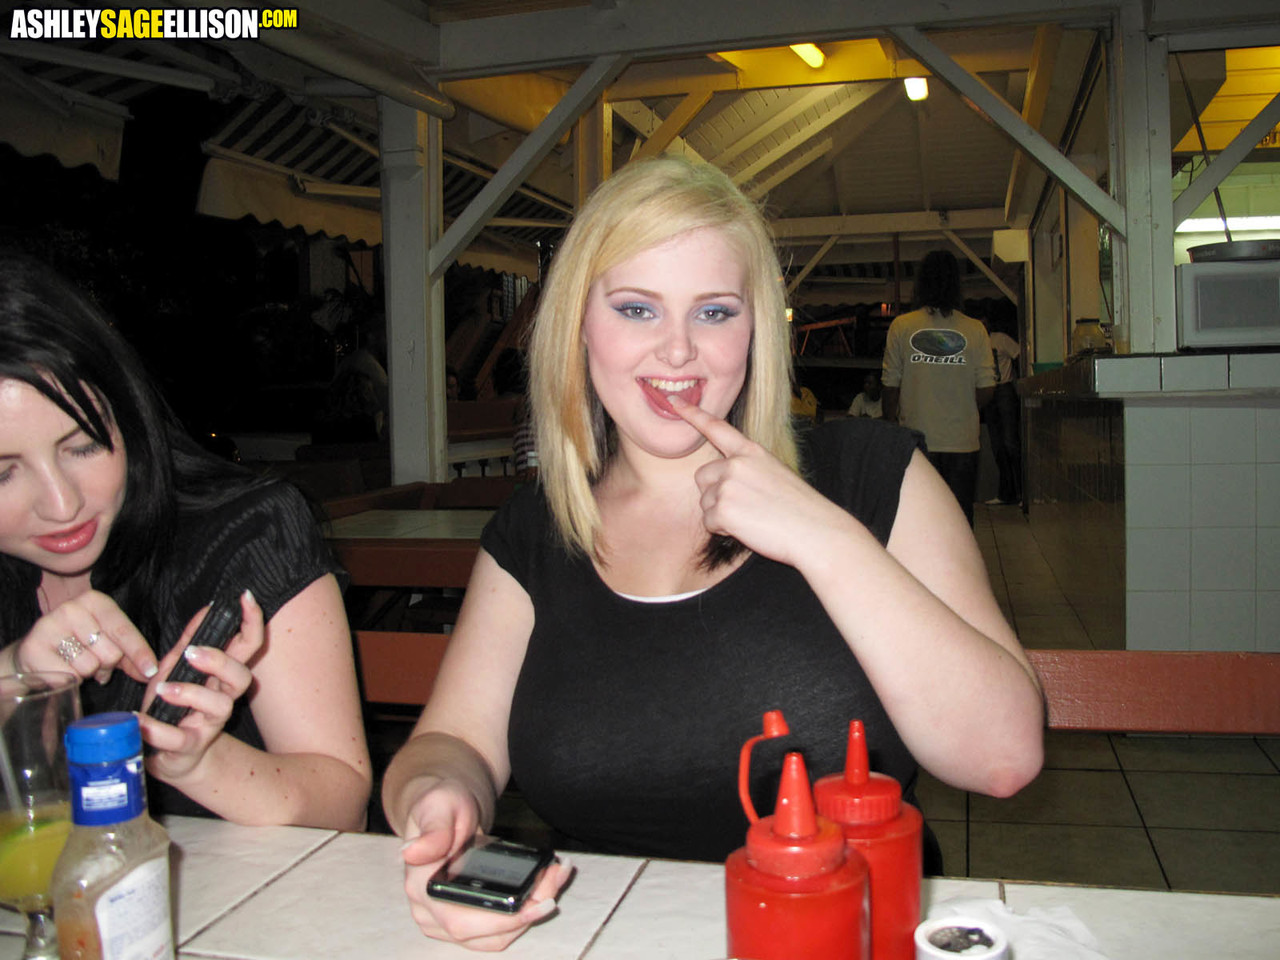 Fat chick Ashley Sage Ellison and her busty gf go out on the town порно фото #426376435